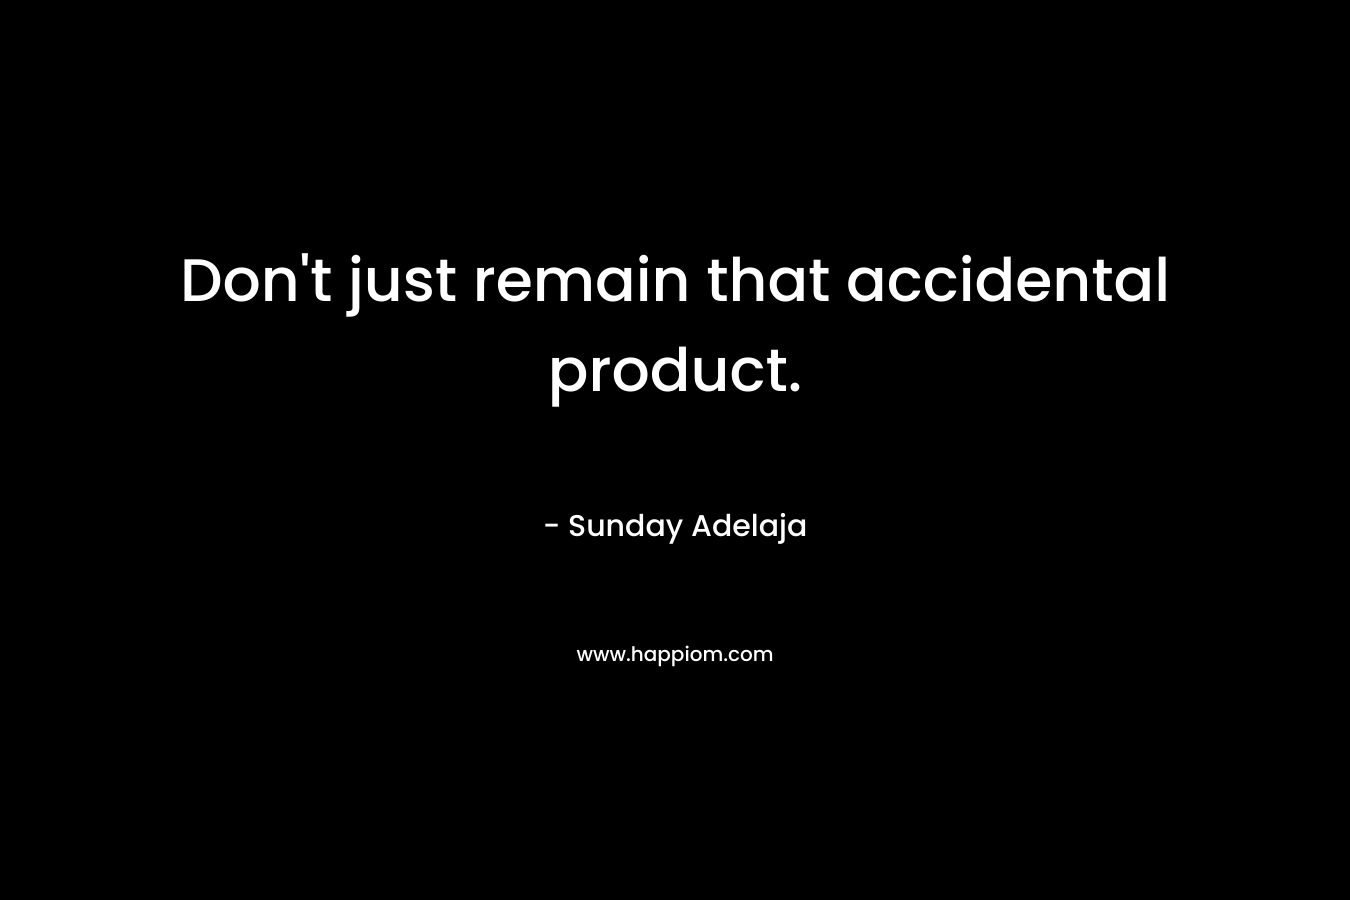 Don't just remain that accidental product.